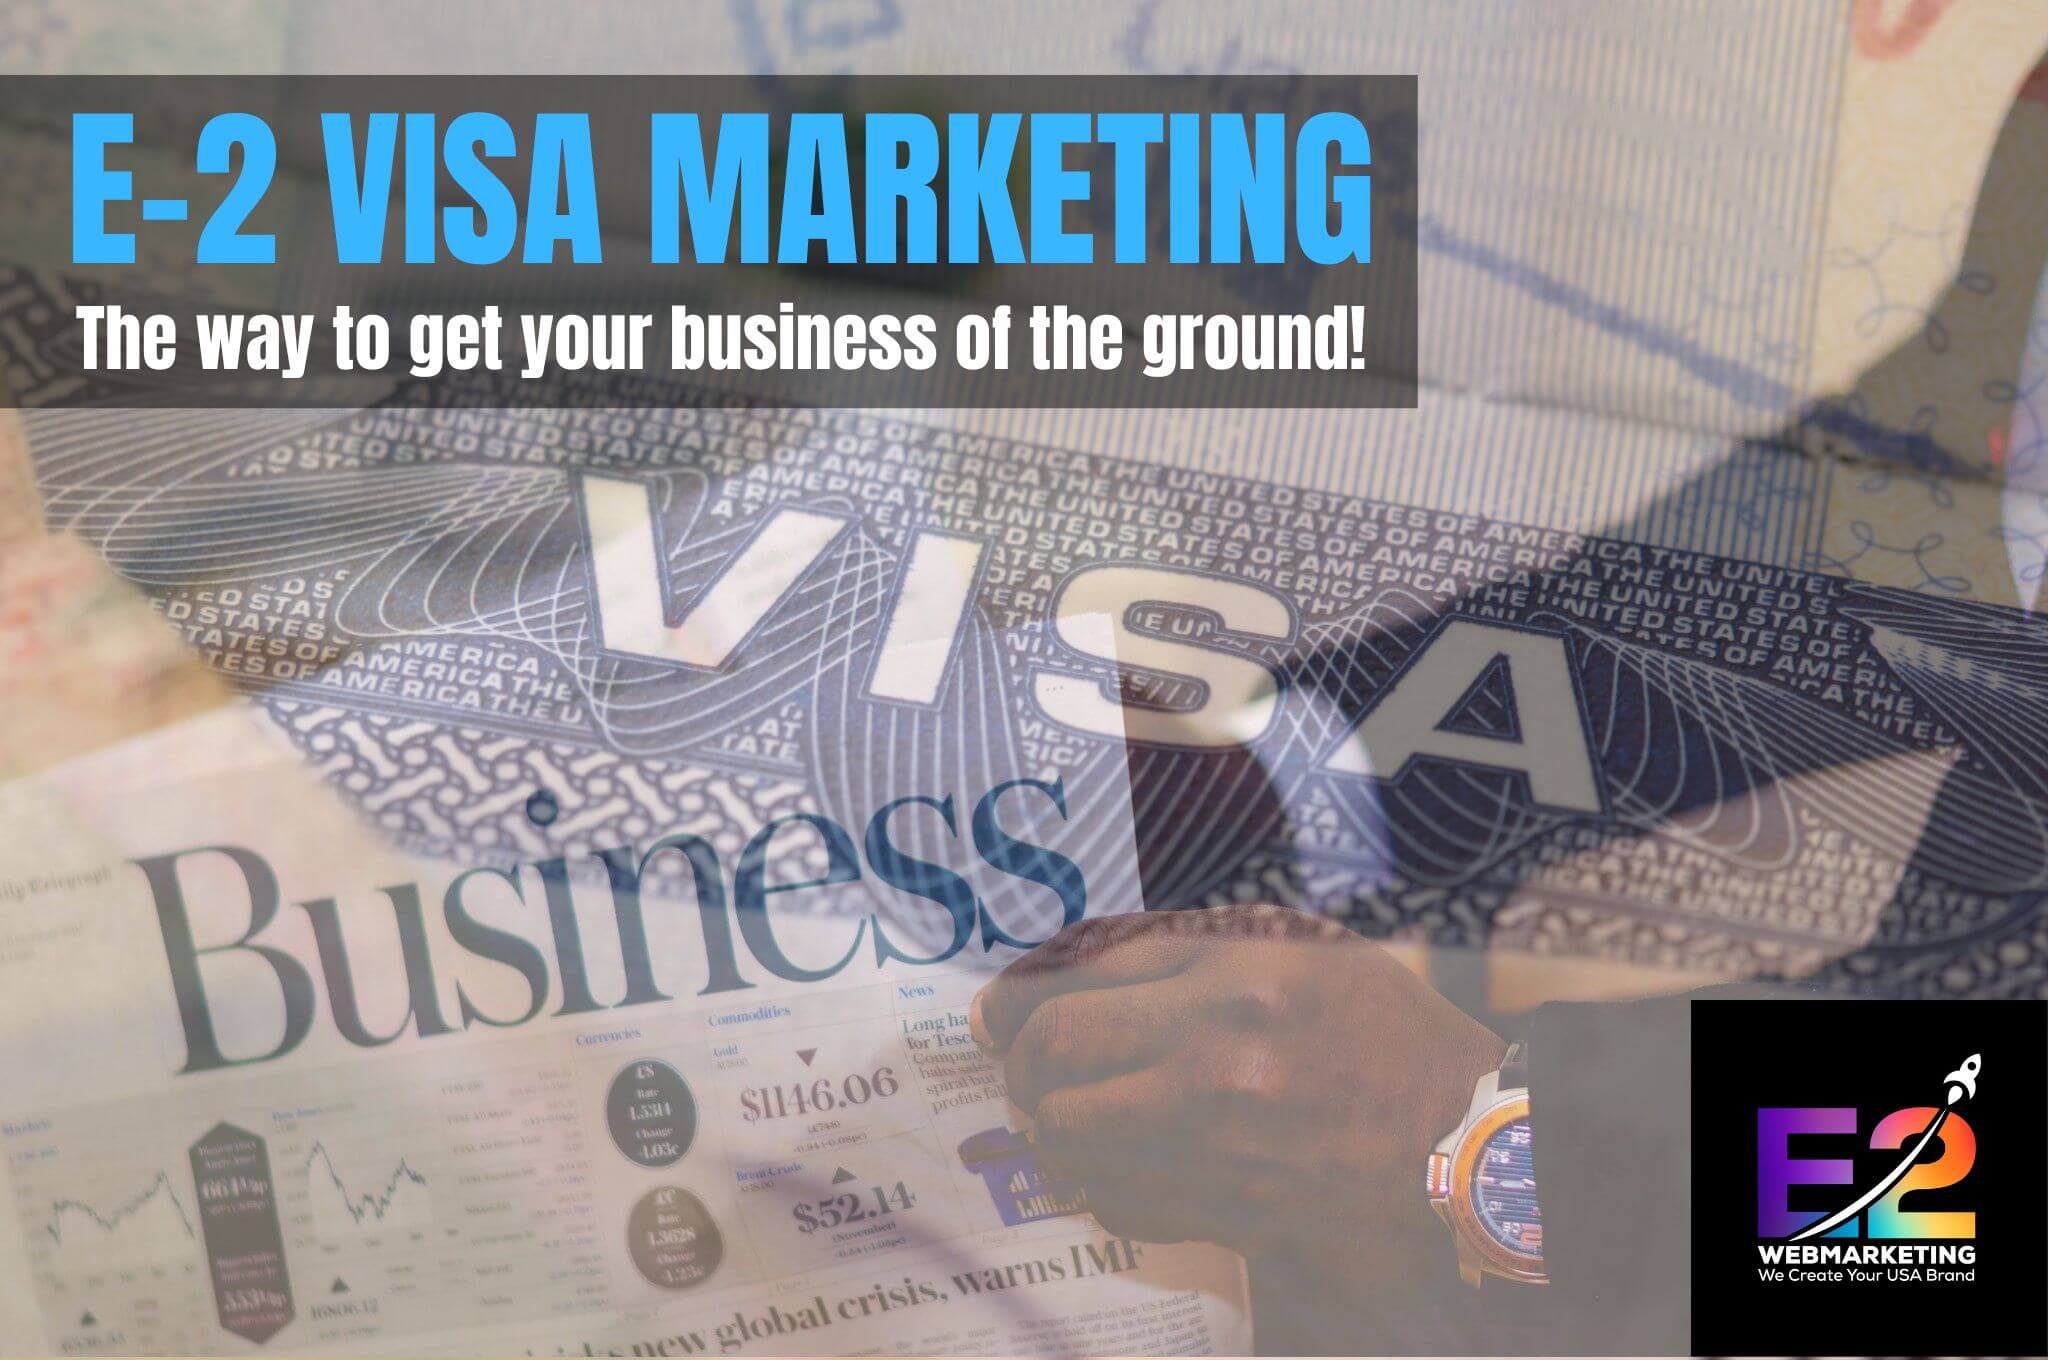 E2 Visa Marketing - the right solution for marketing strategies for your E-2 Visa Company in the USA. Be successful. Come to e2webmarketing